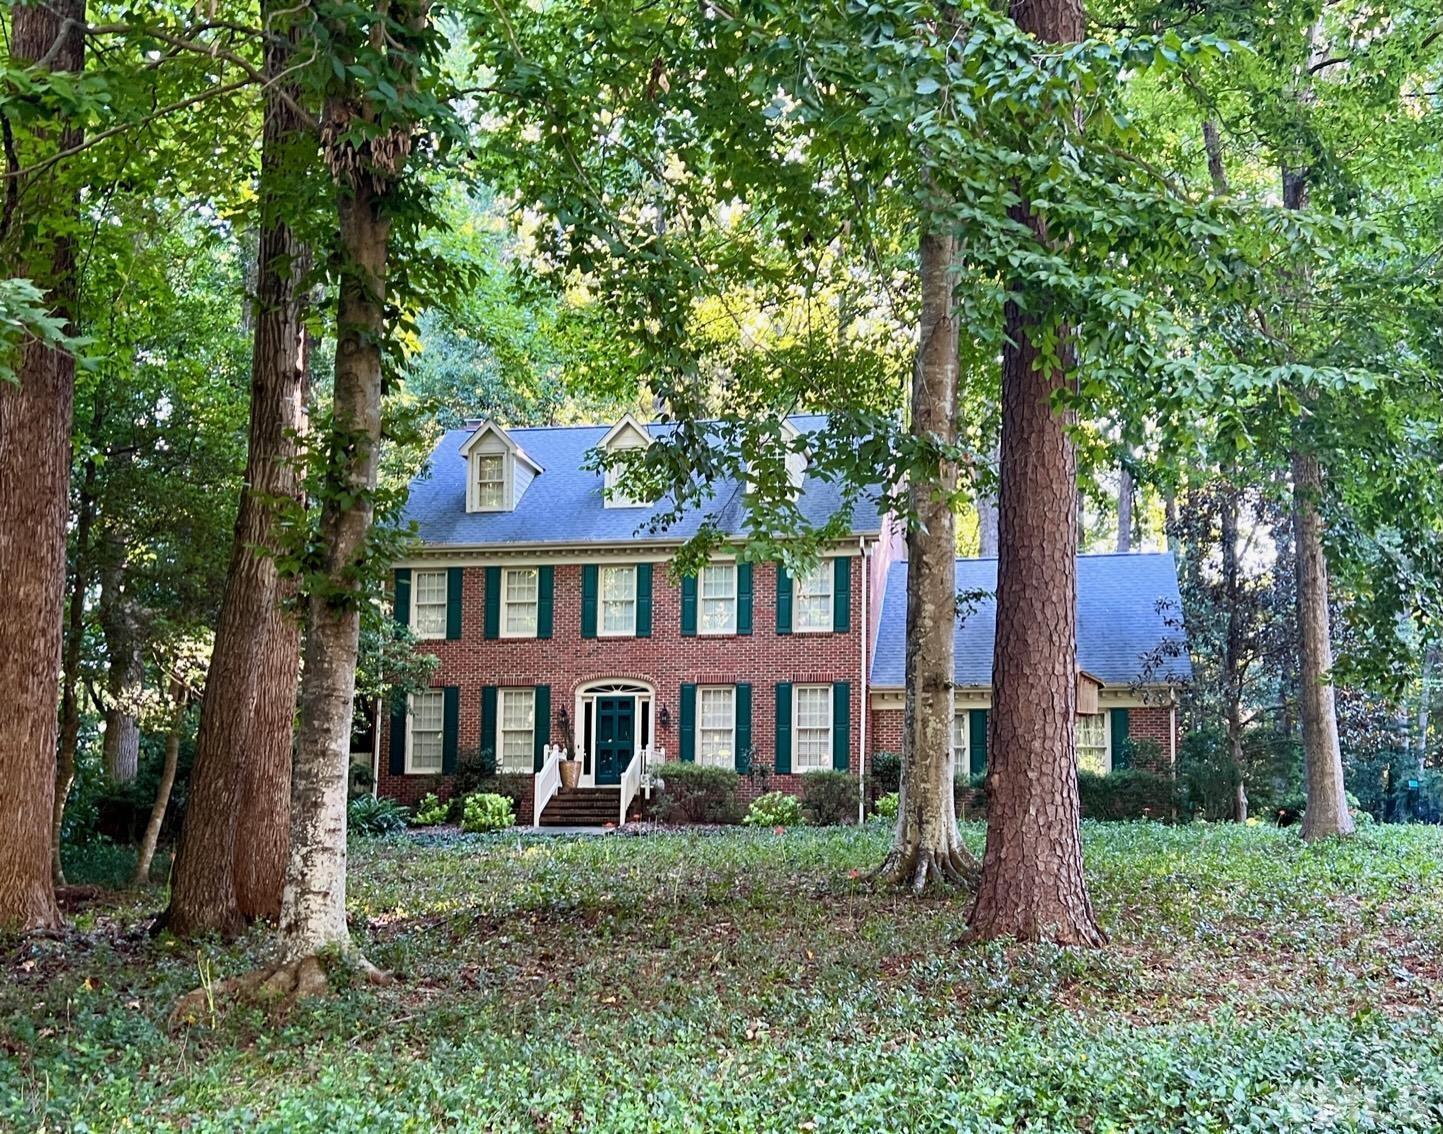 a view of a brick house with a yard and large trees